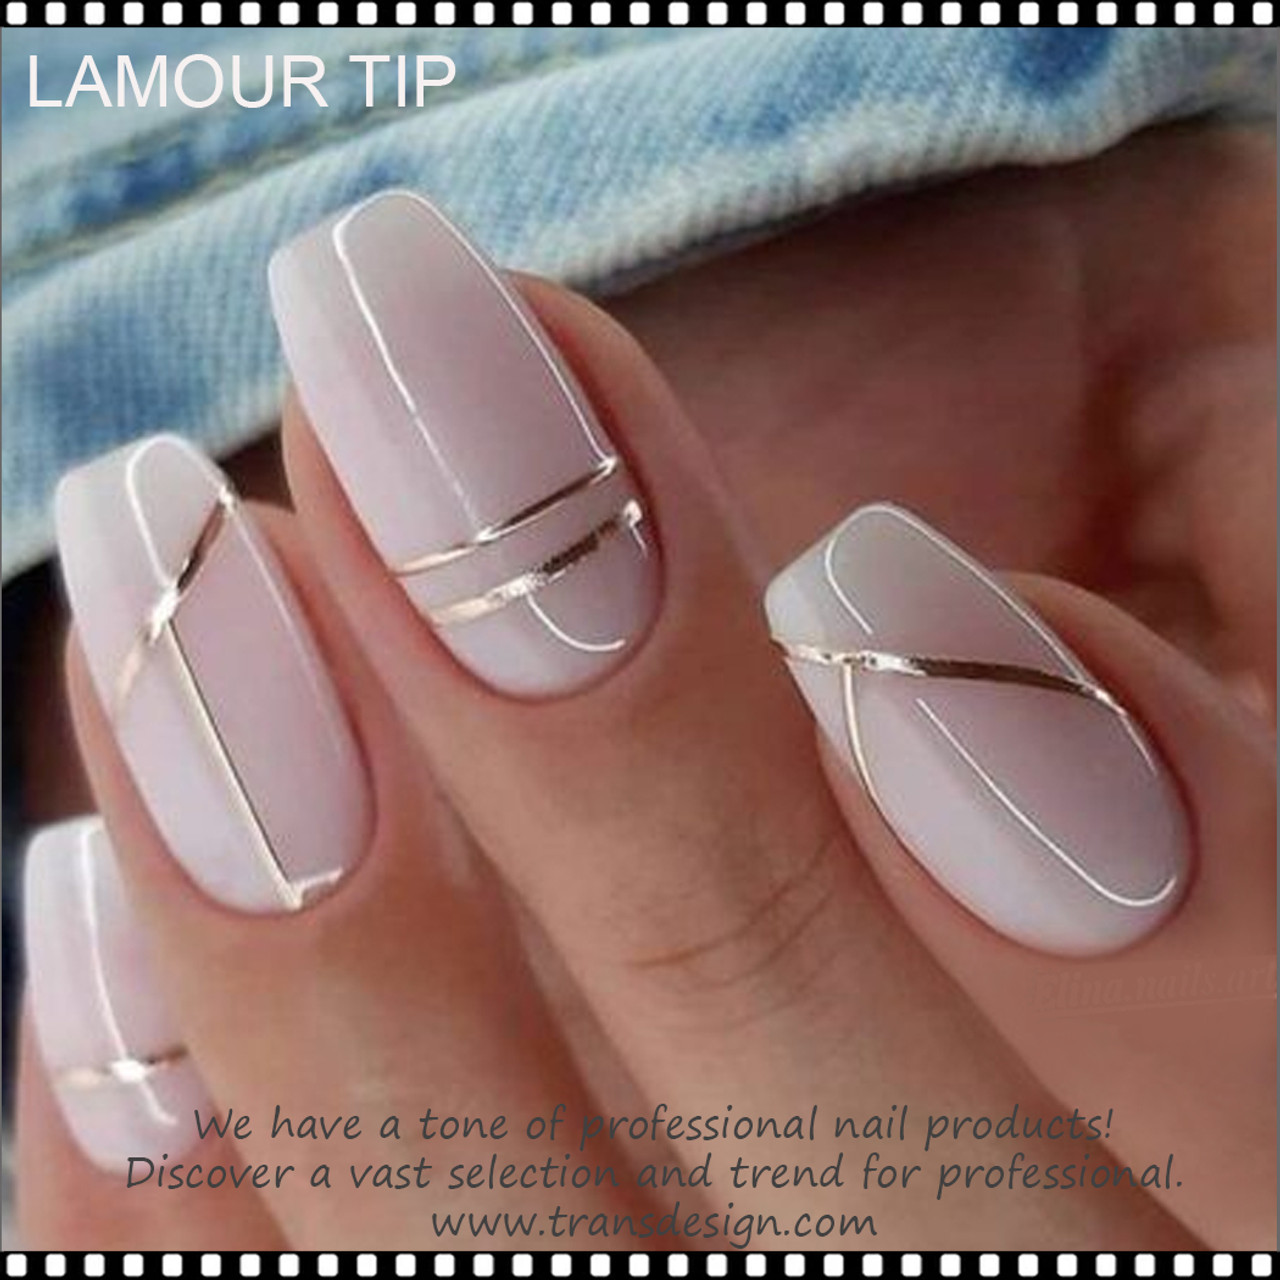 L'Amour Nails - L'Amour Nails added a new photo.